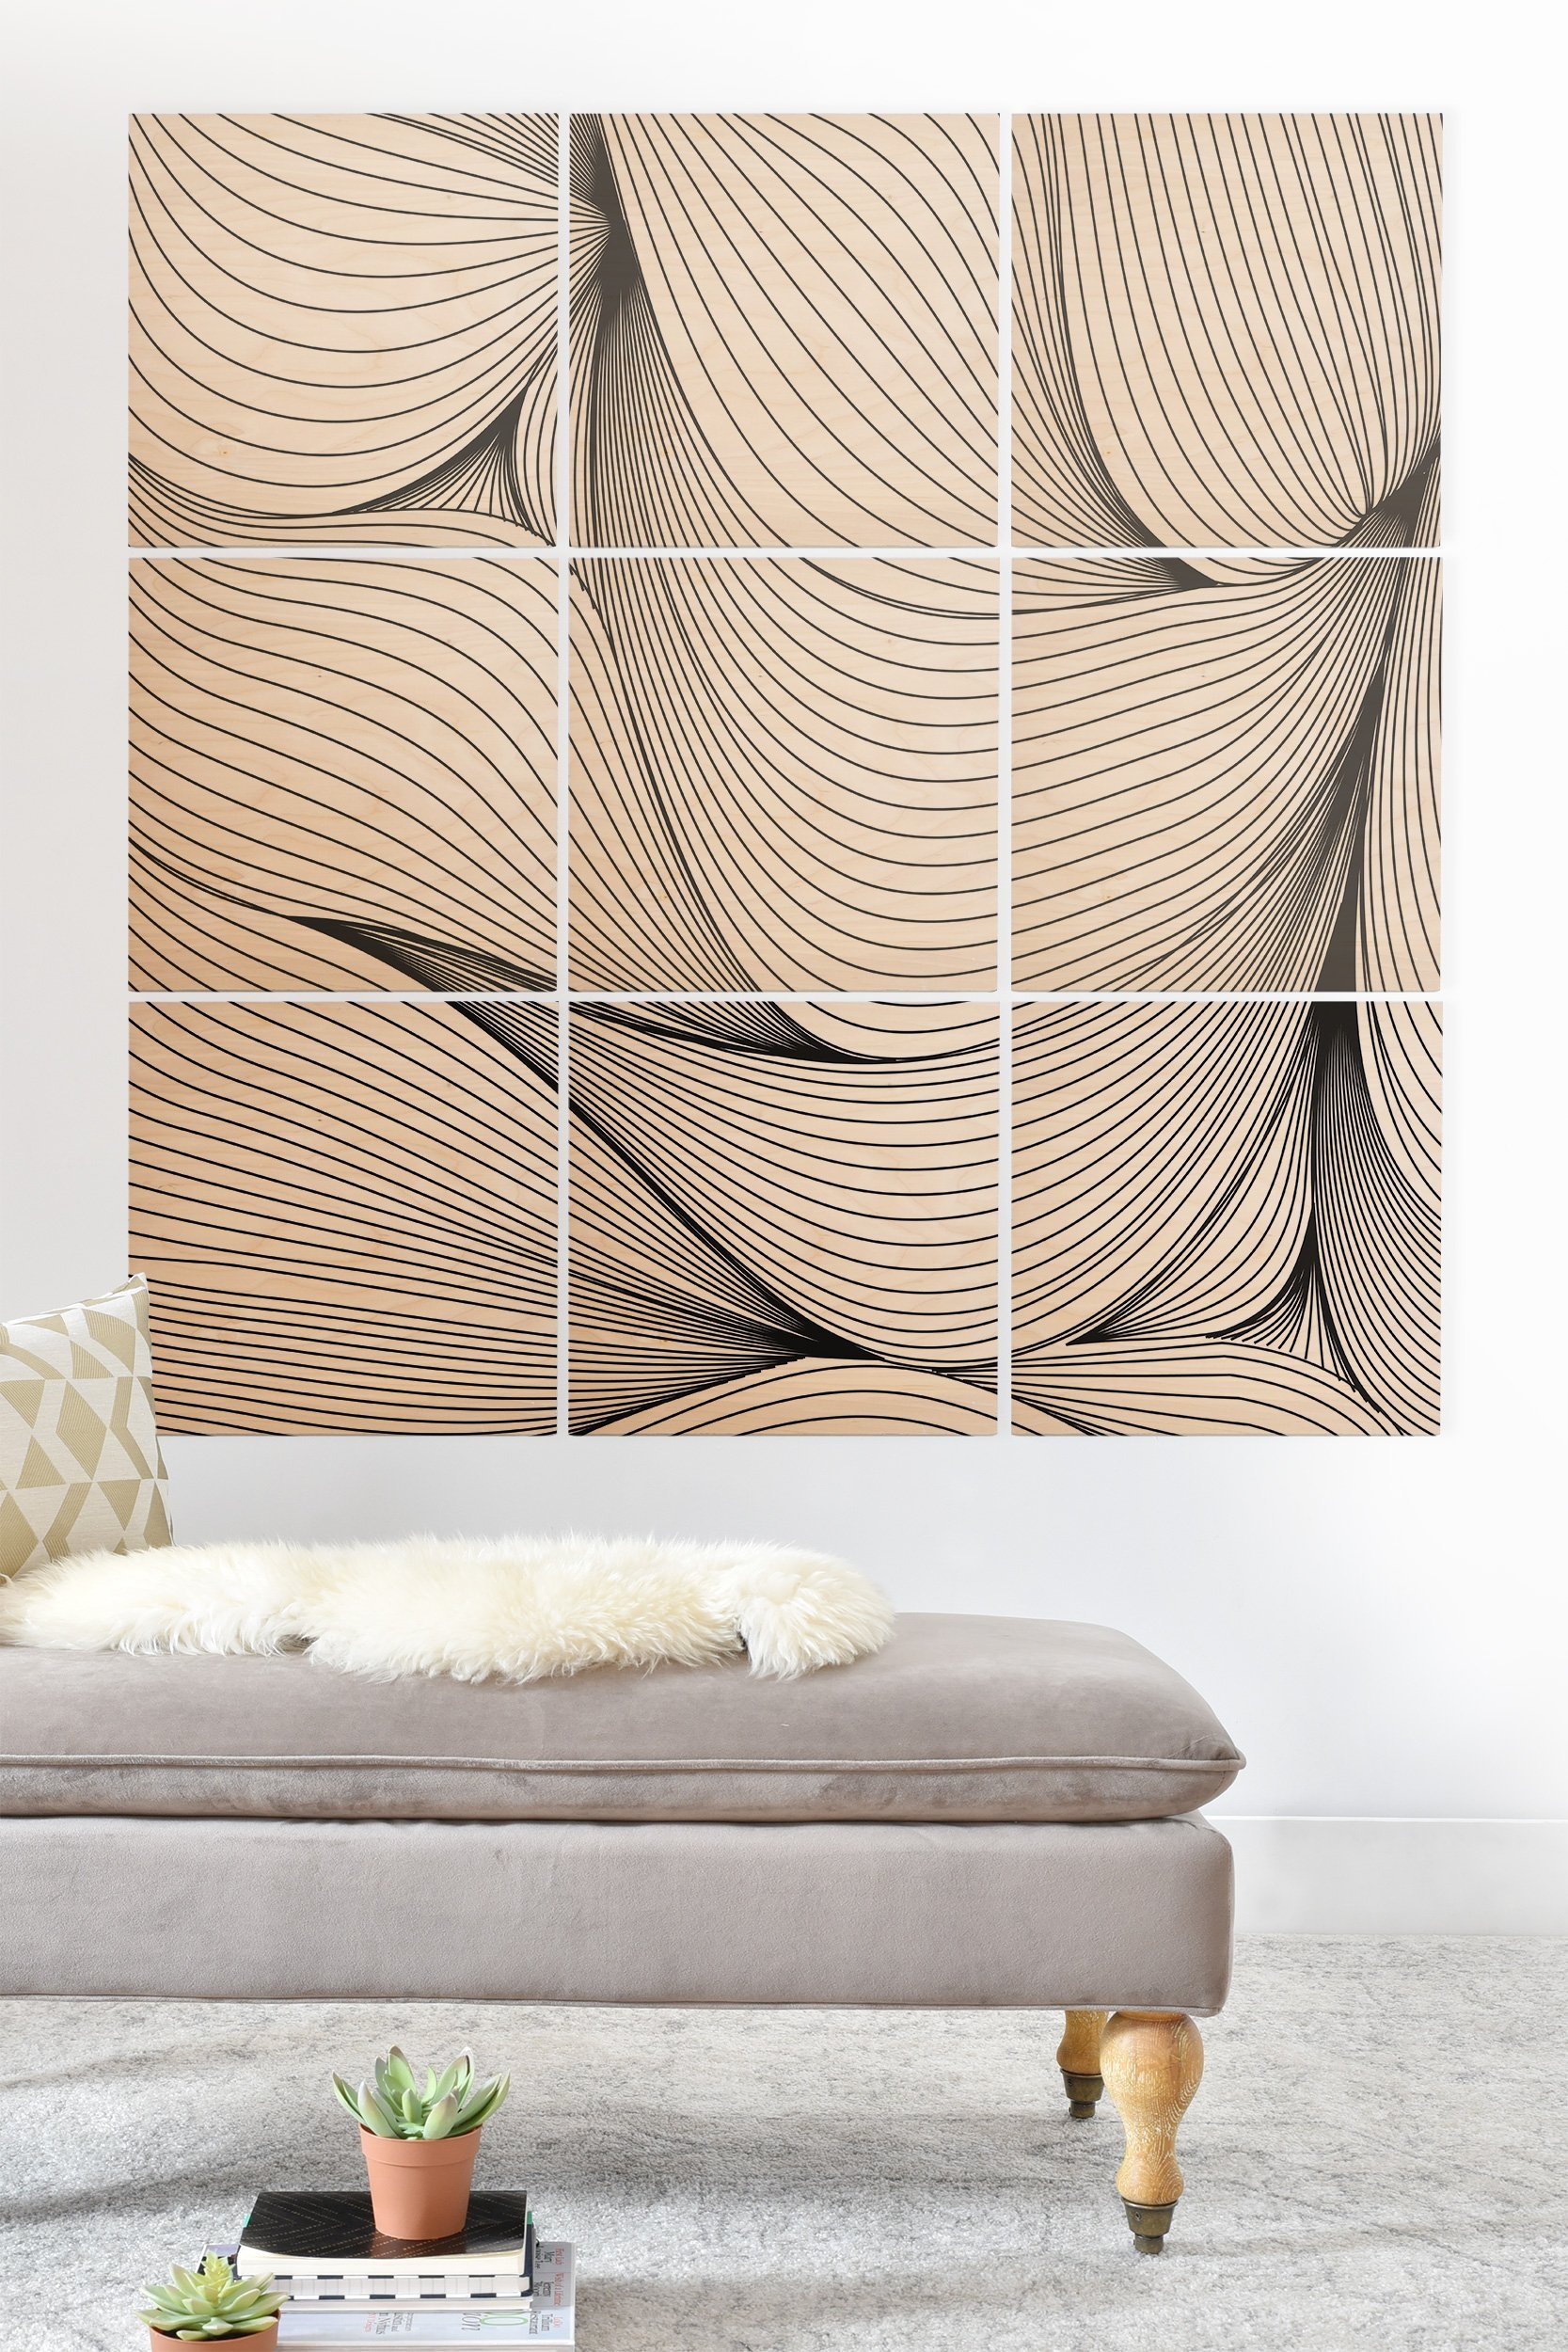 WOOD WALL MURAL SEAMLESS LINES  - 3x3 - Image 0